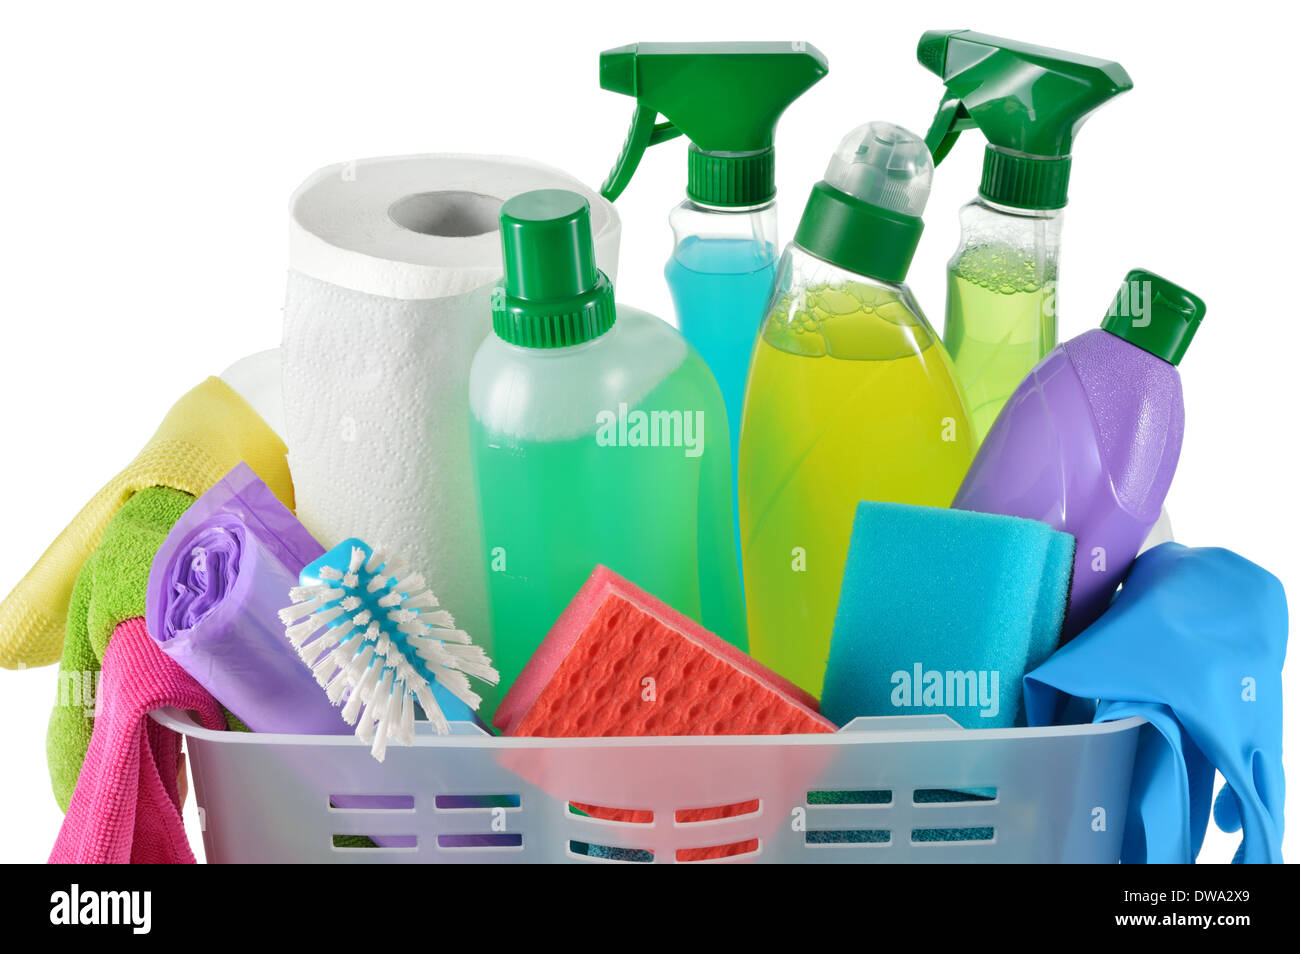 Variety of cleaning products Stock Photo by ©JanPietruszka 71082471